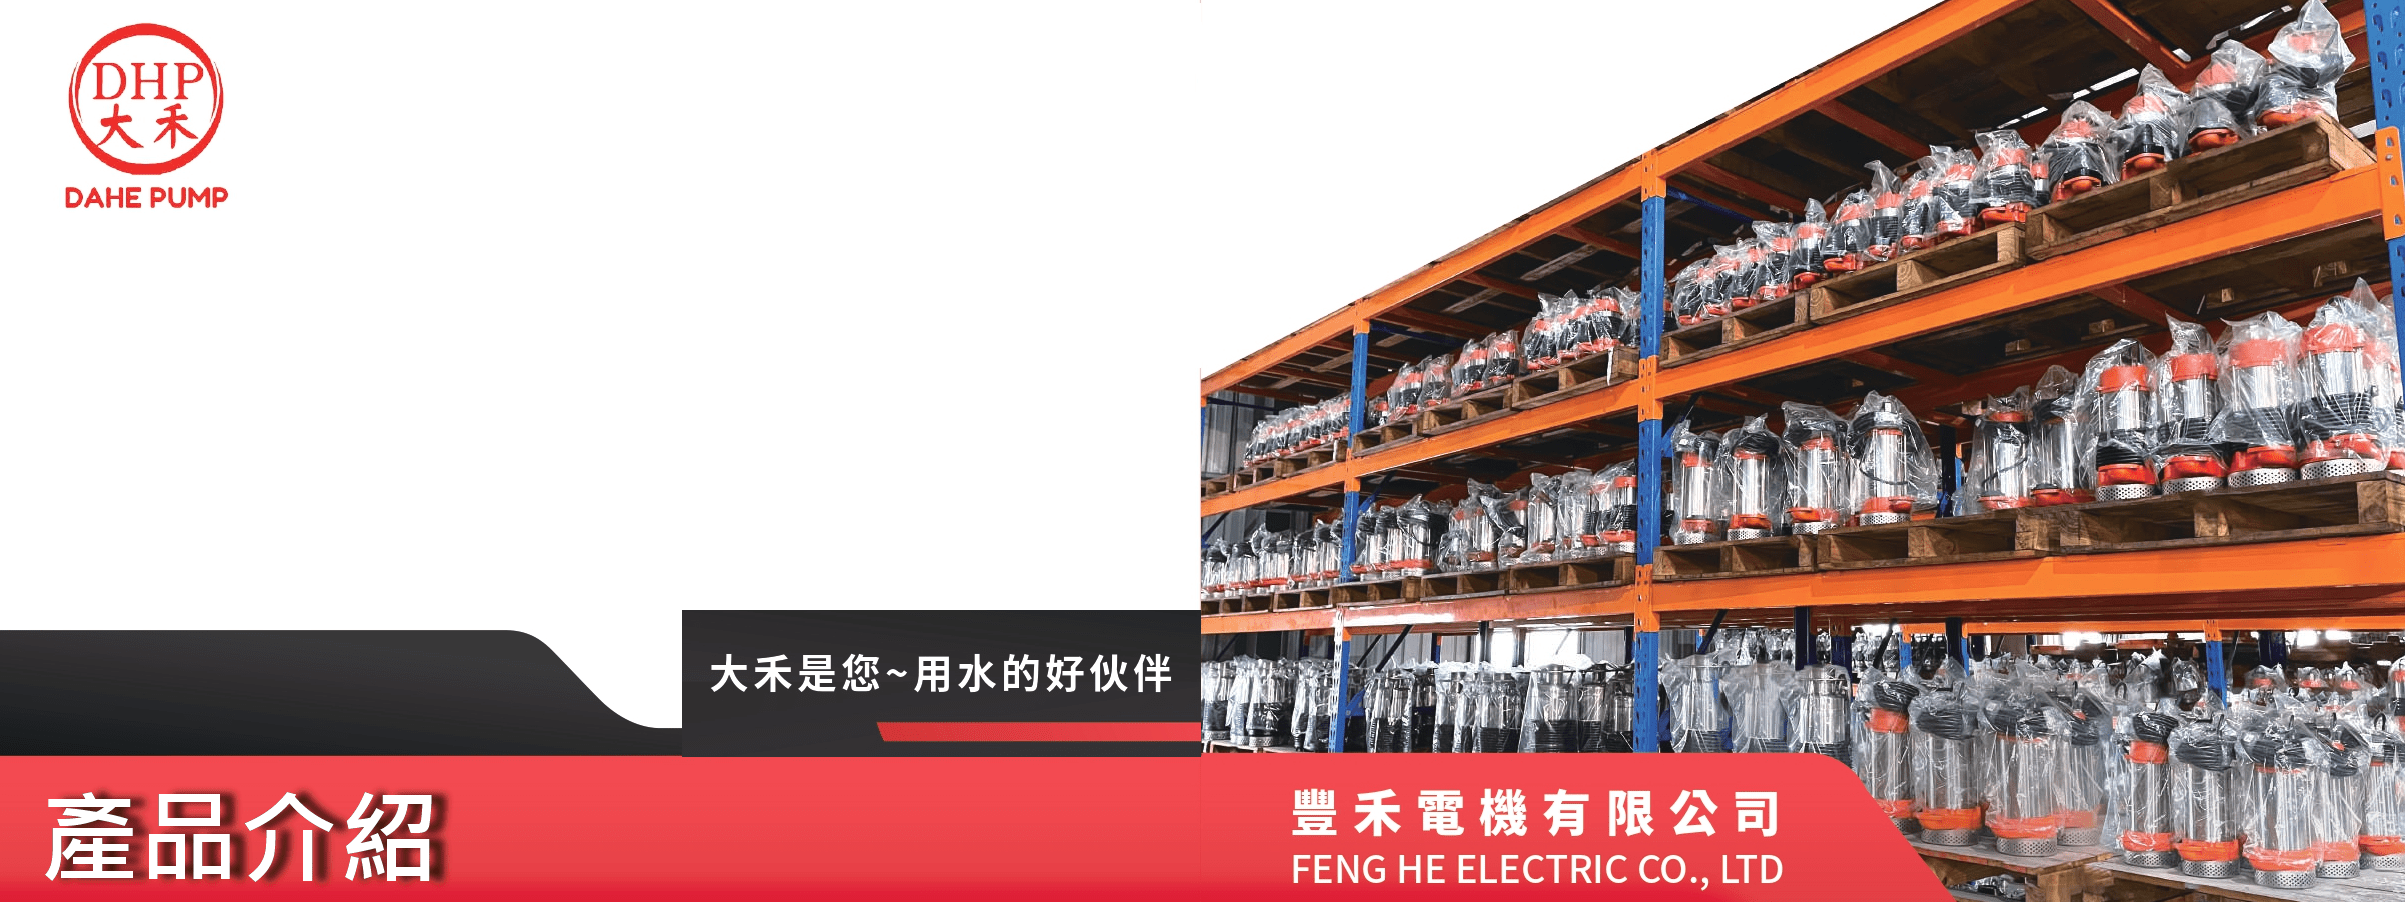 FENG HE ELECTRIC CO.,LTD.的Products Banner pic